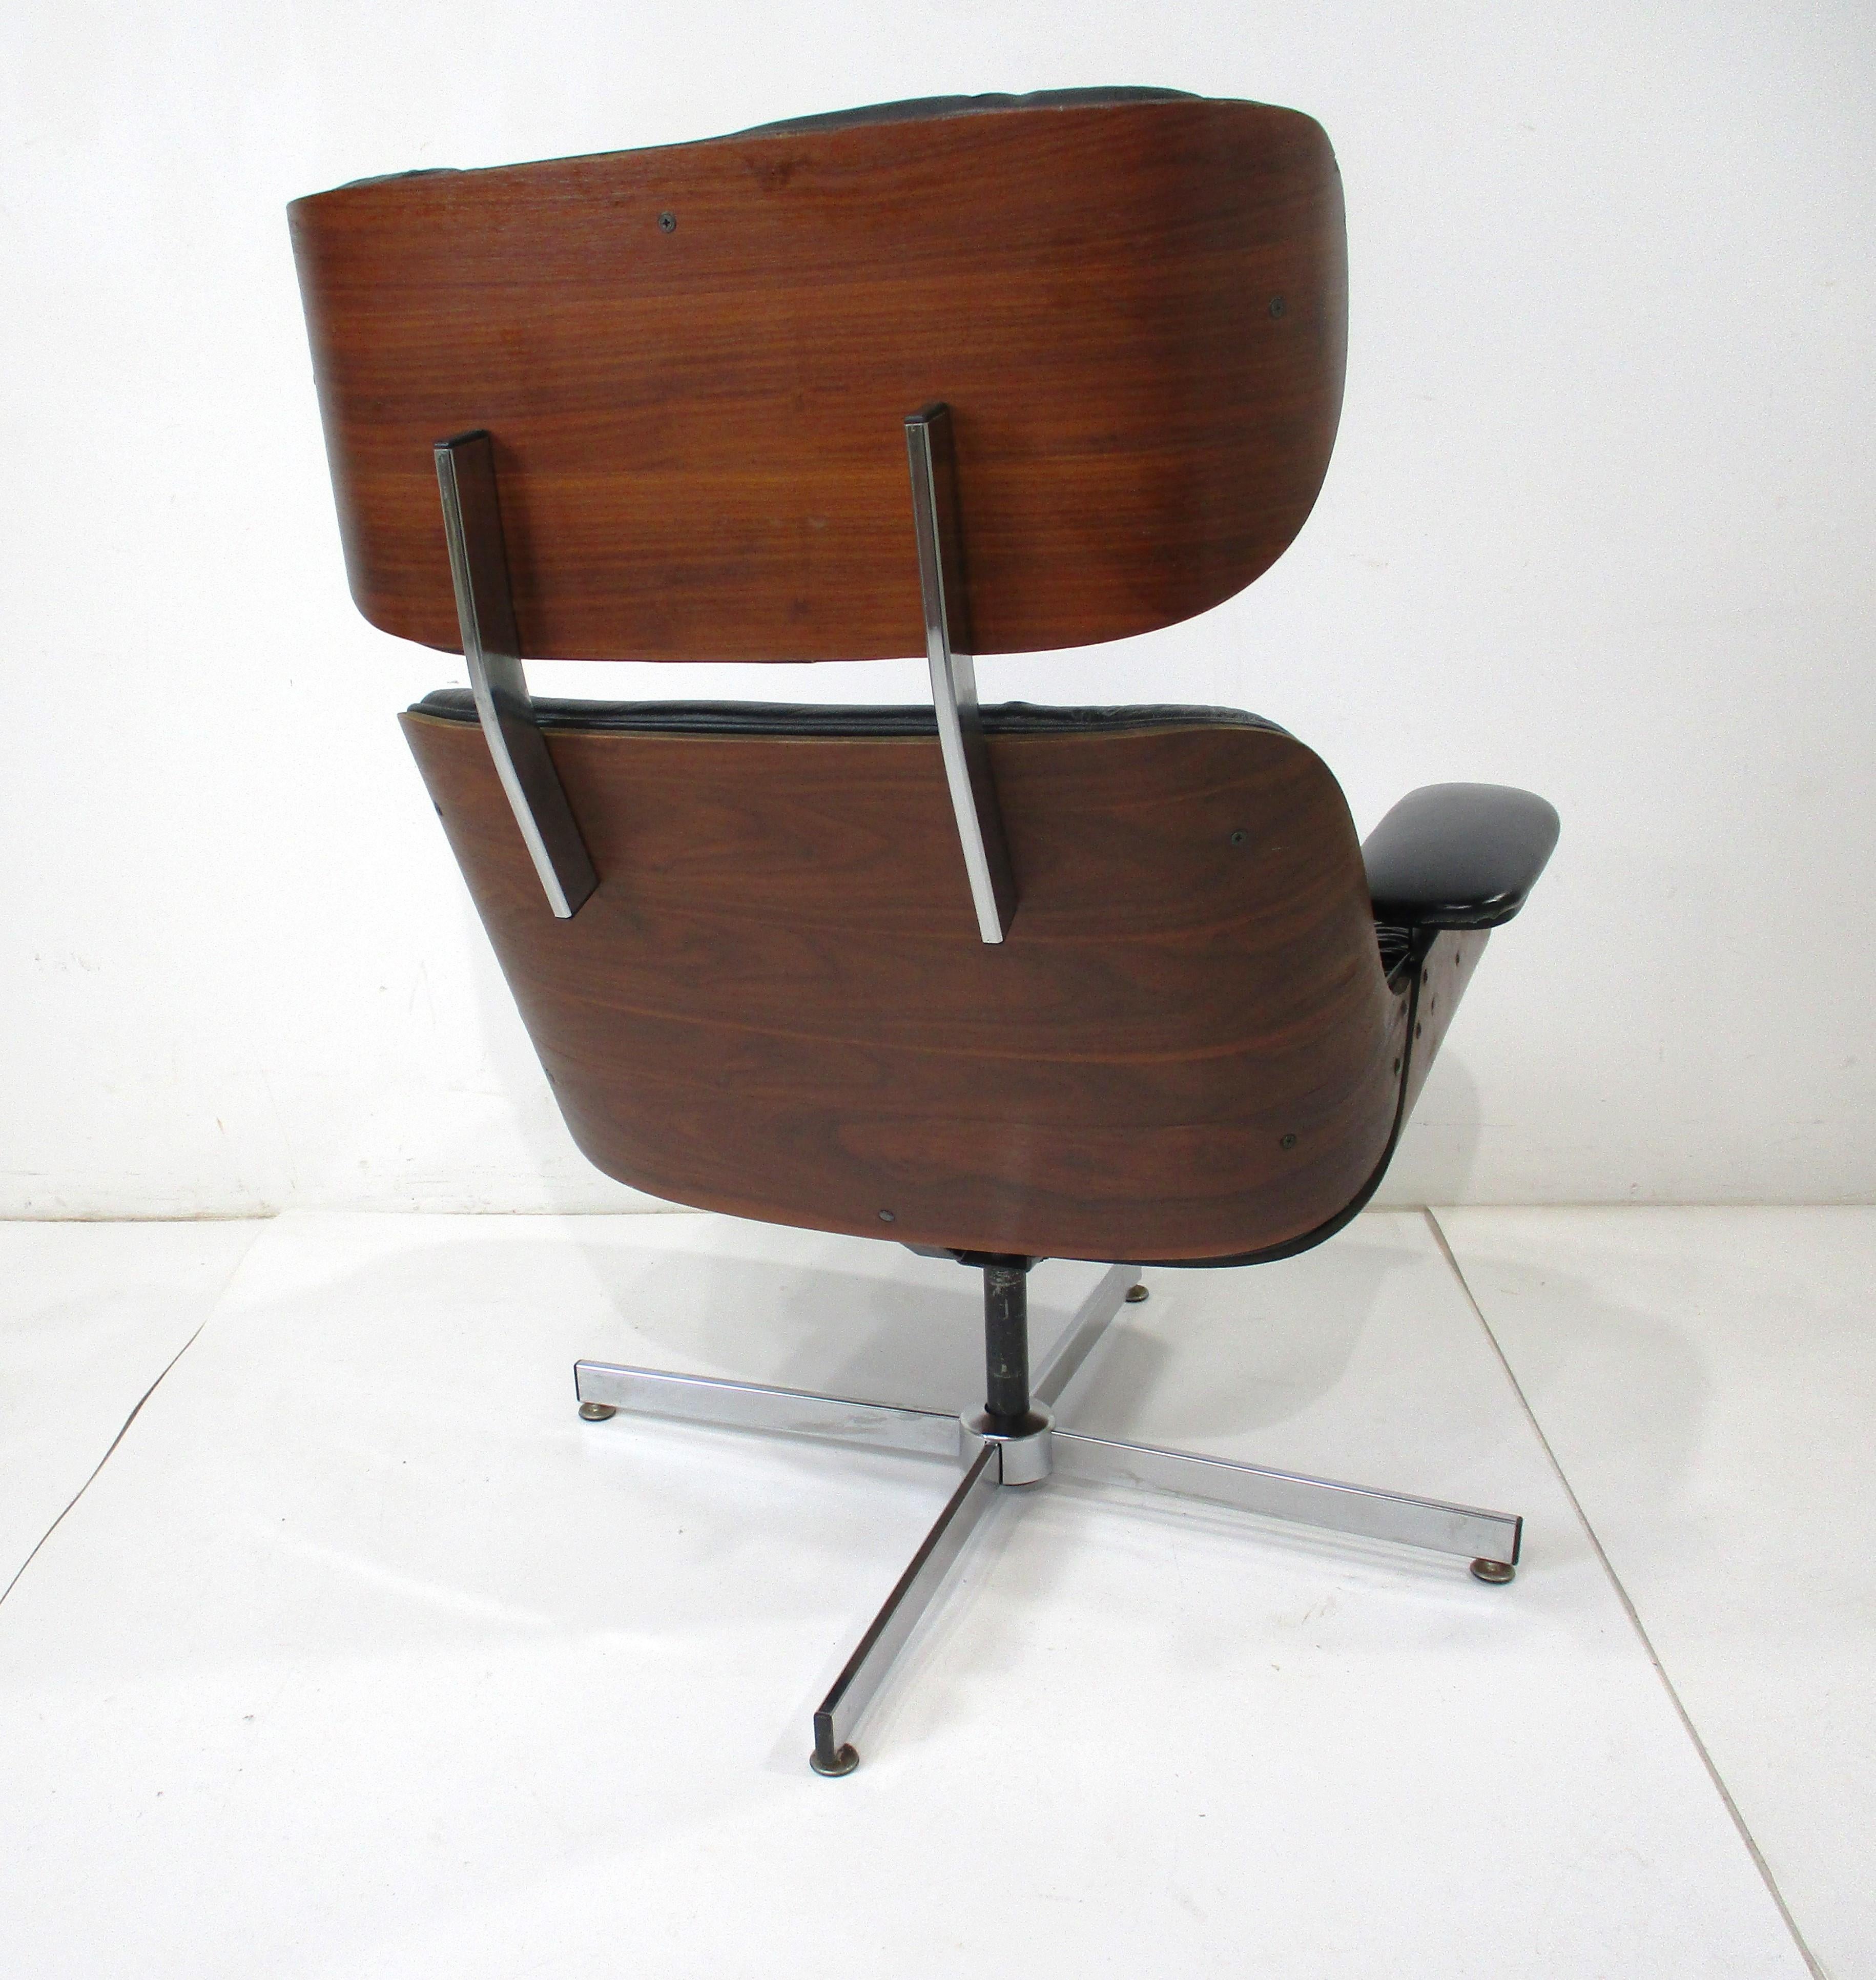 Walnut Leather Lounge Chair by George Mulhauser for Plycraft   In Good Condition For Sale In Cincinnati, OH